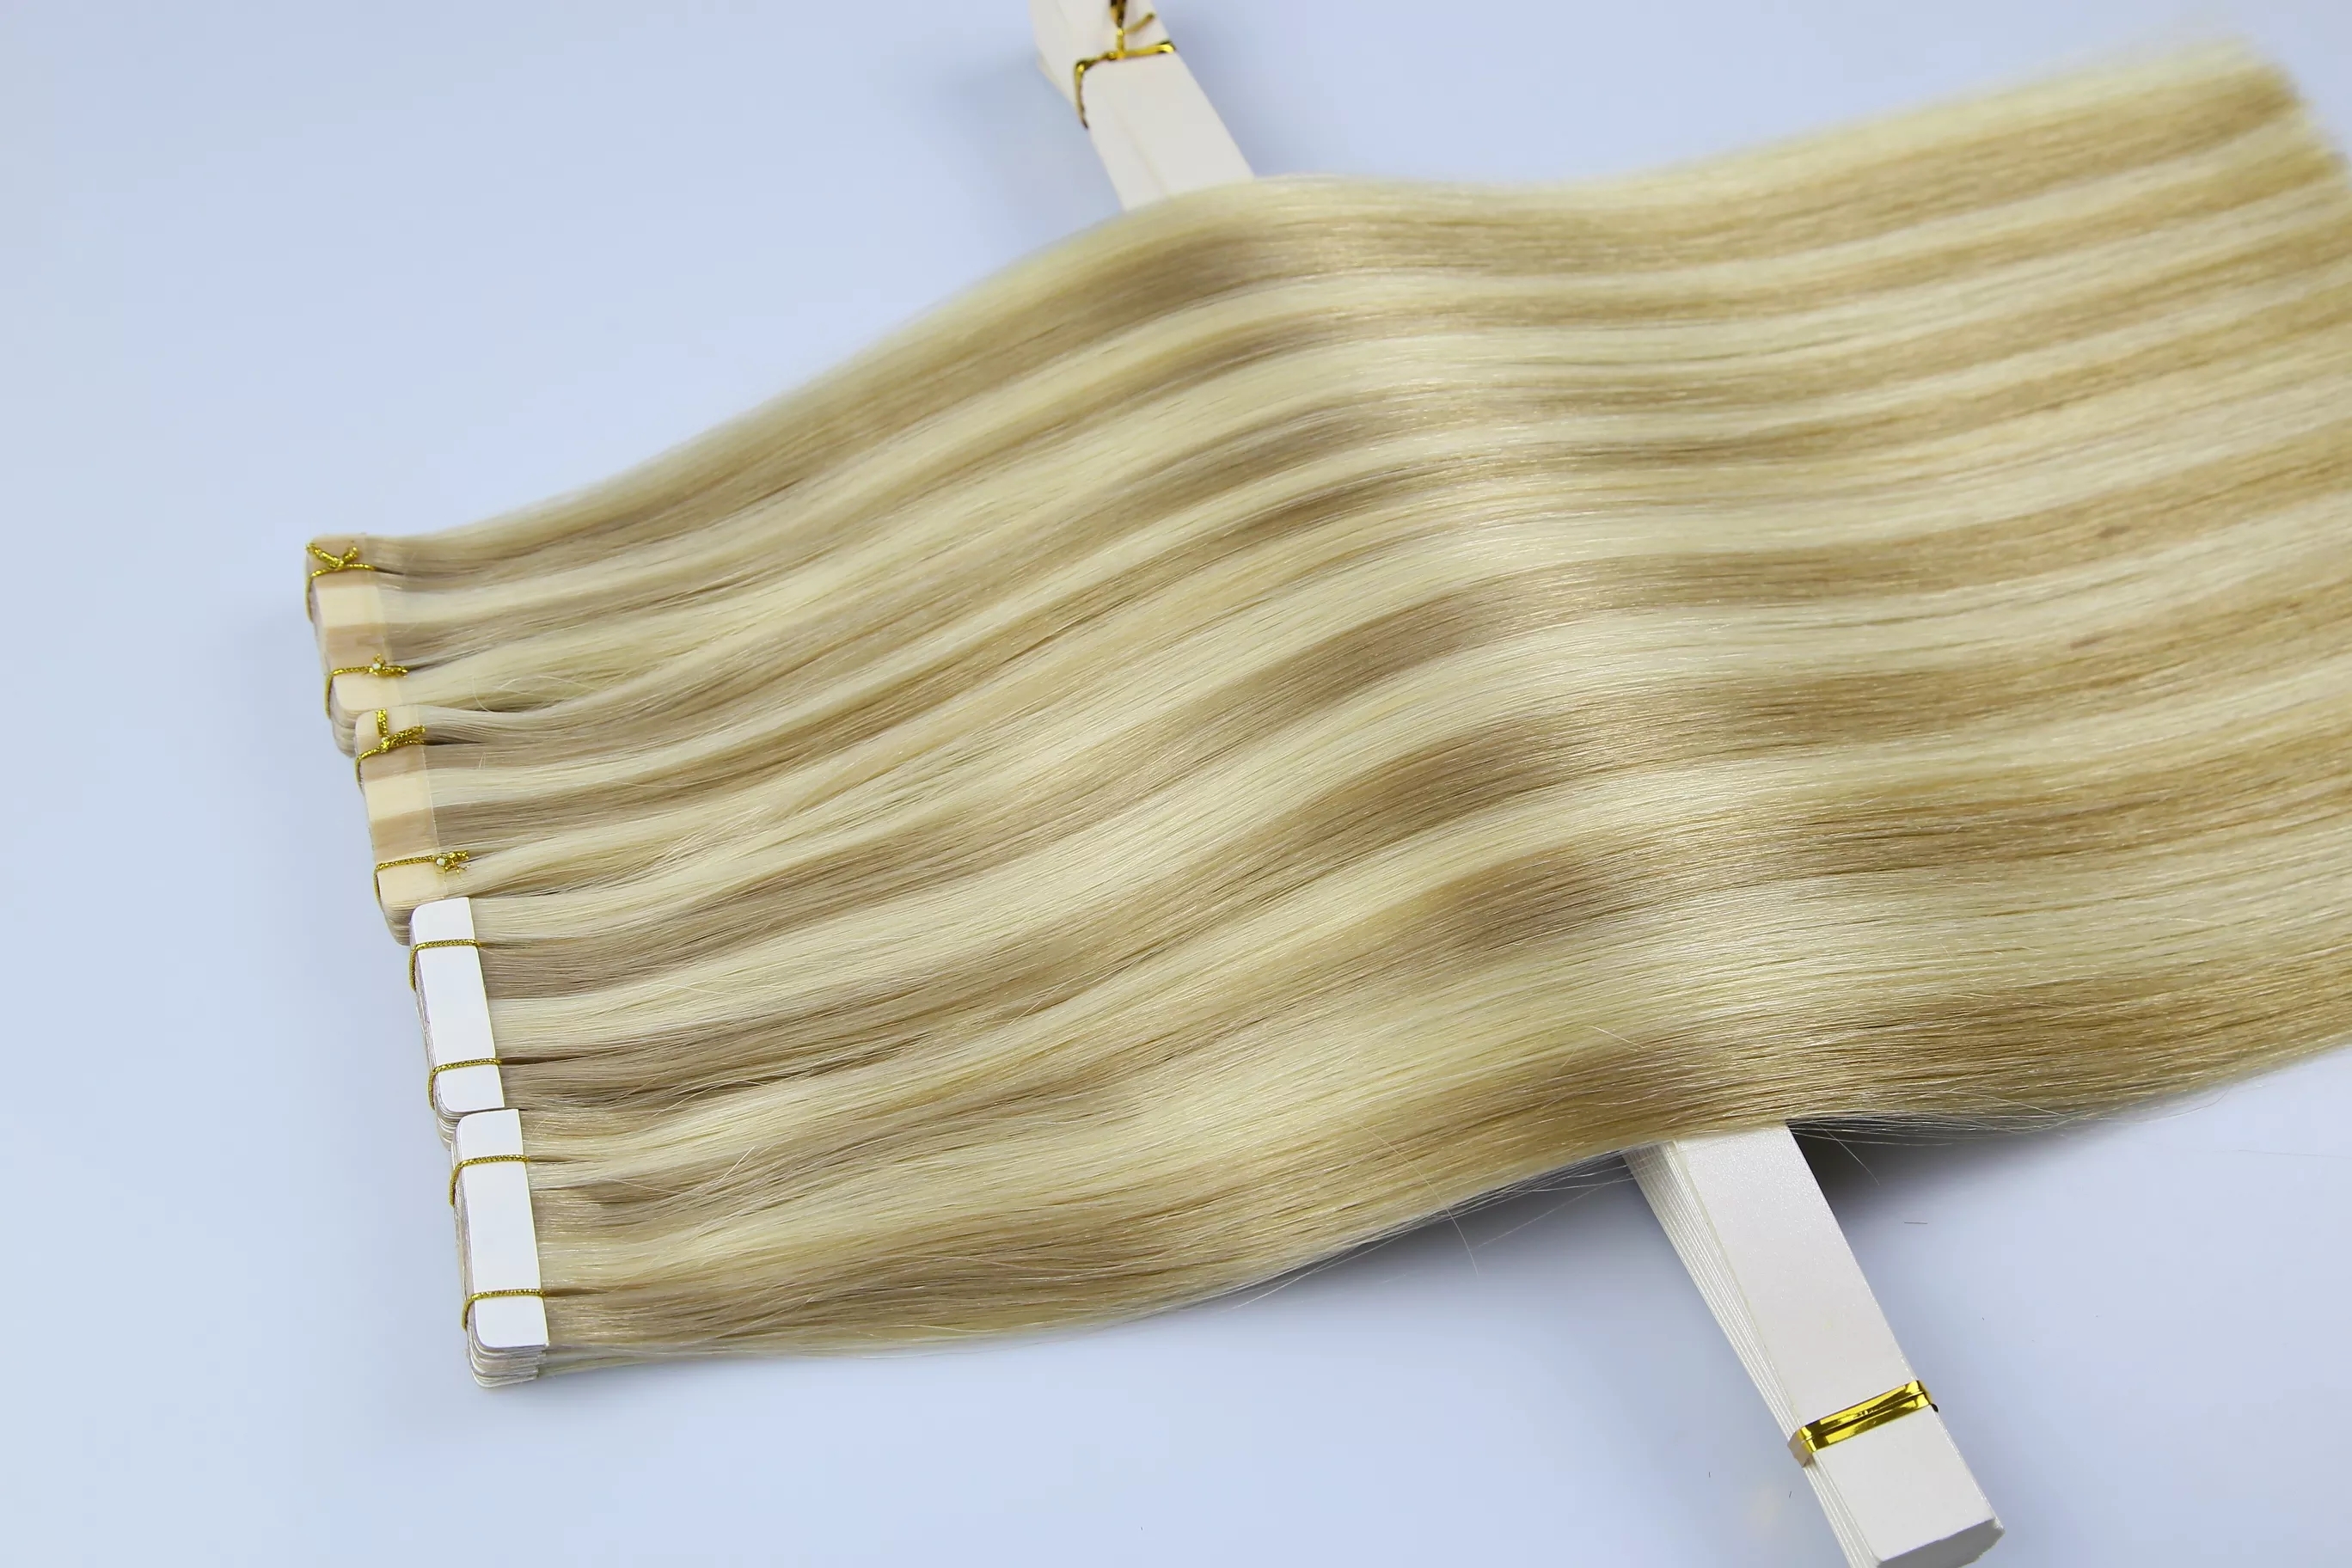  Invisible Remy Tape In Hair Extensions Double Drawn 100% Human Hair Blonde Tape In Hair Extensions Human Hair